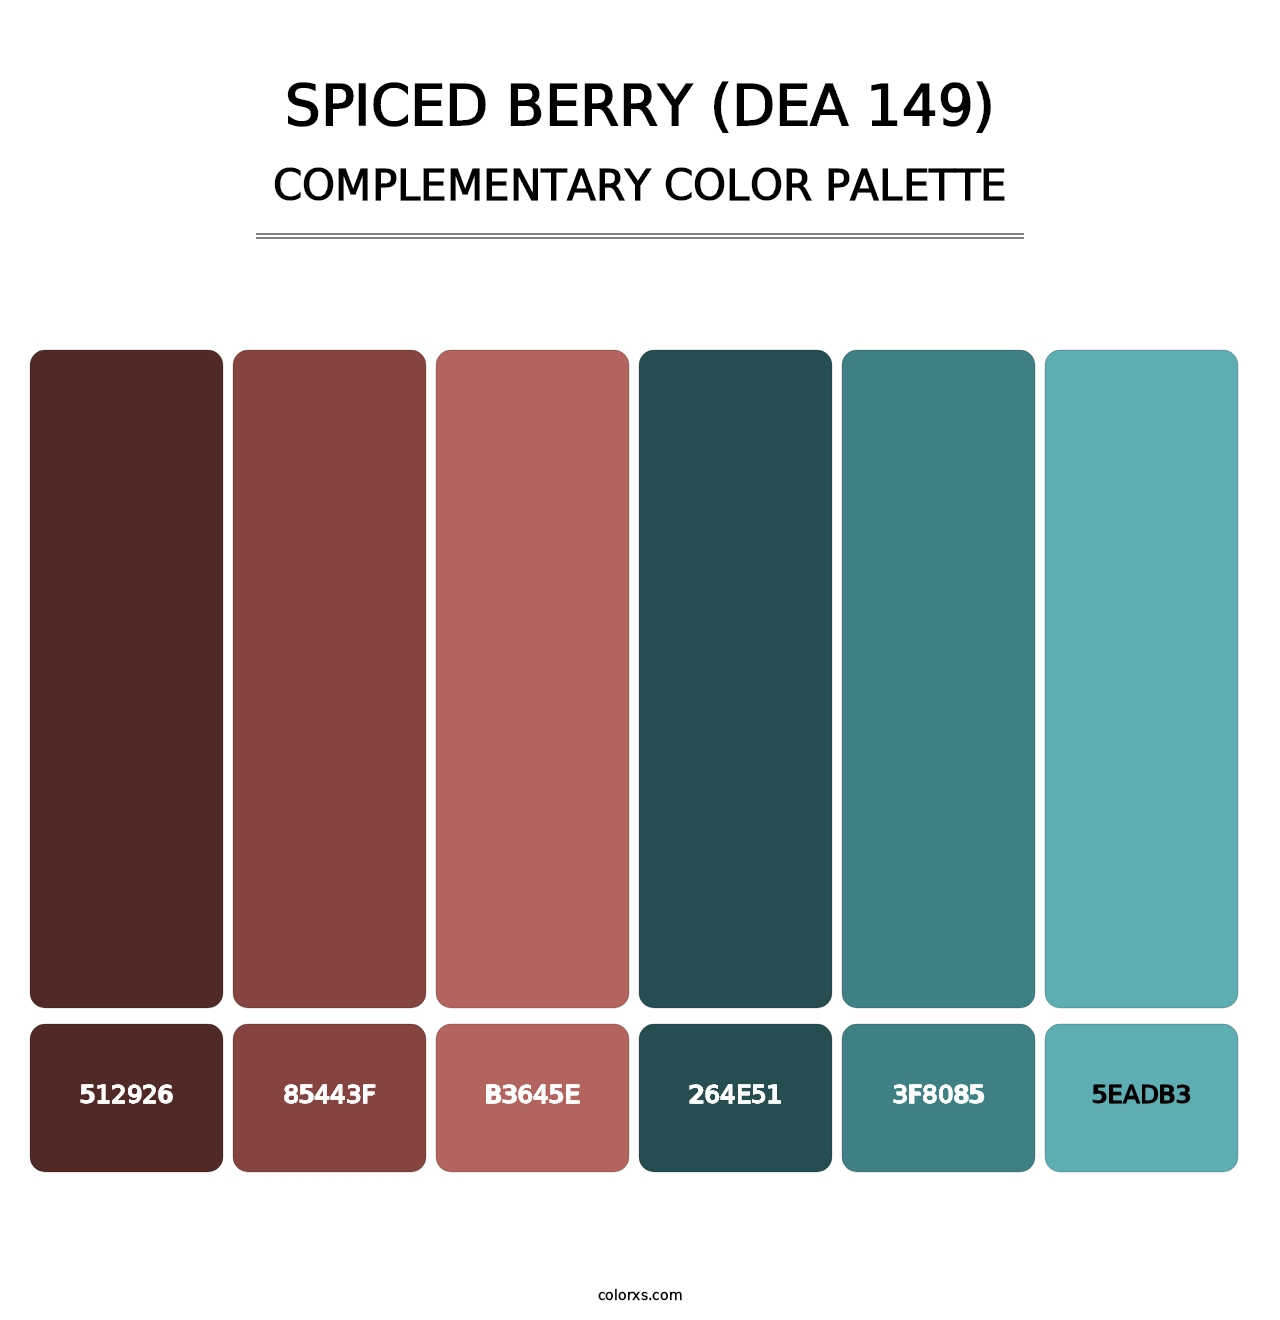 Spiced Berry (DEA 149) - Complementary Color Palette